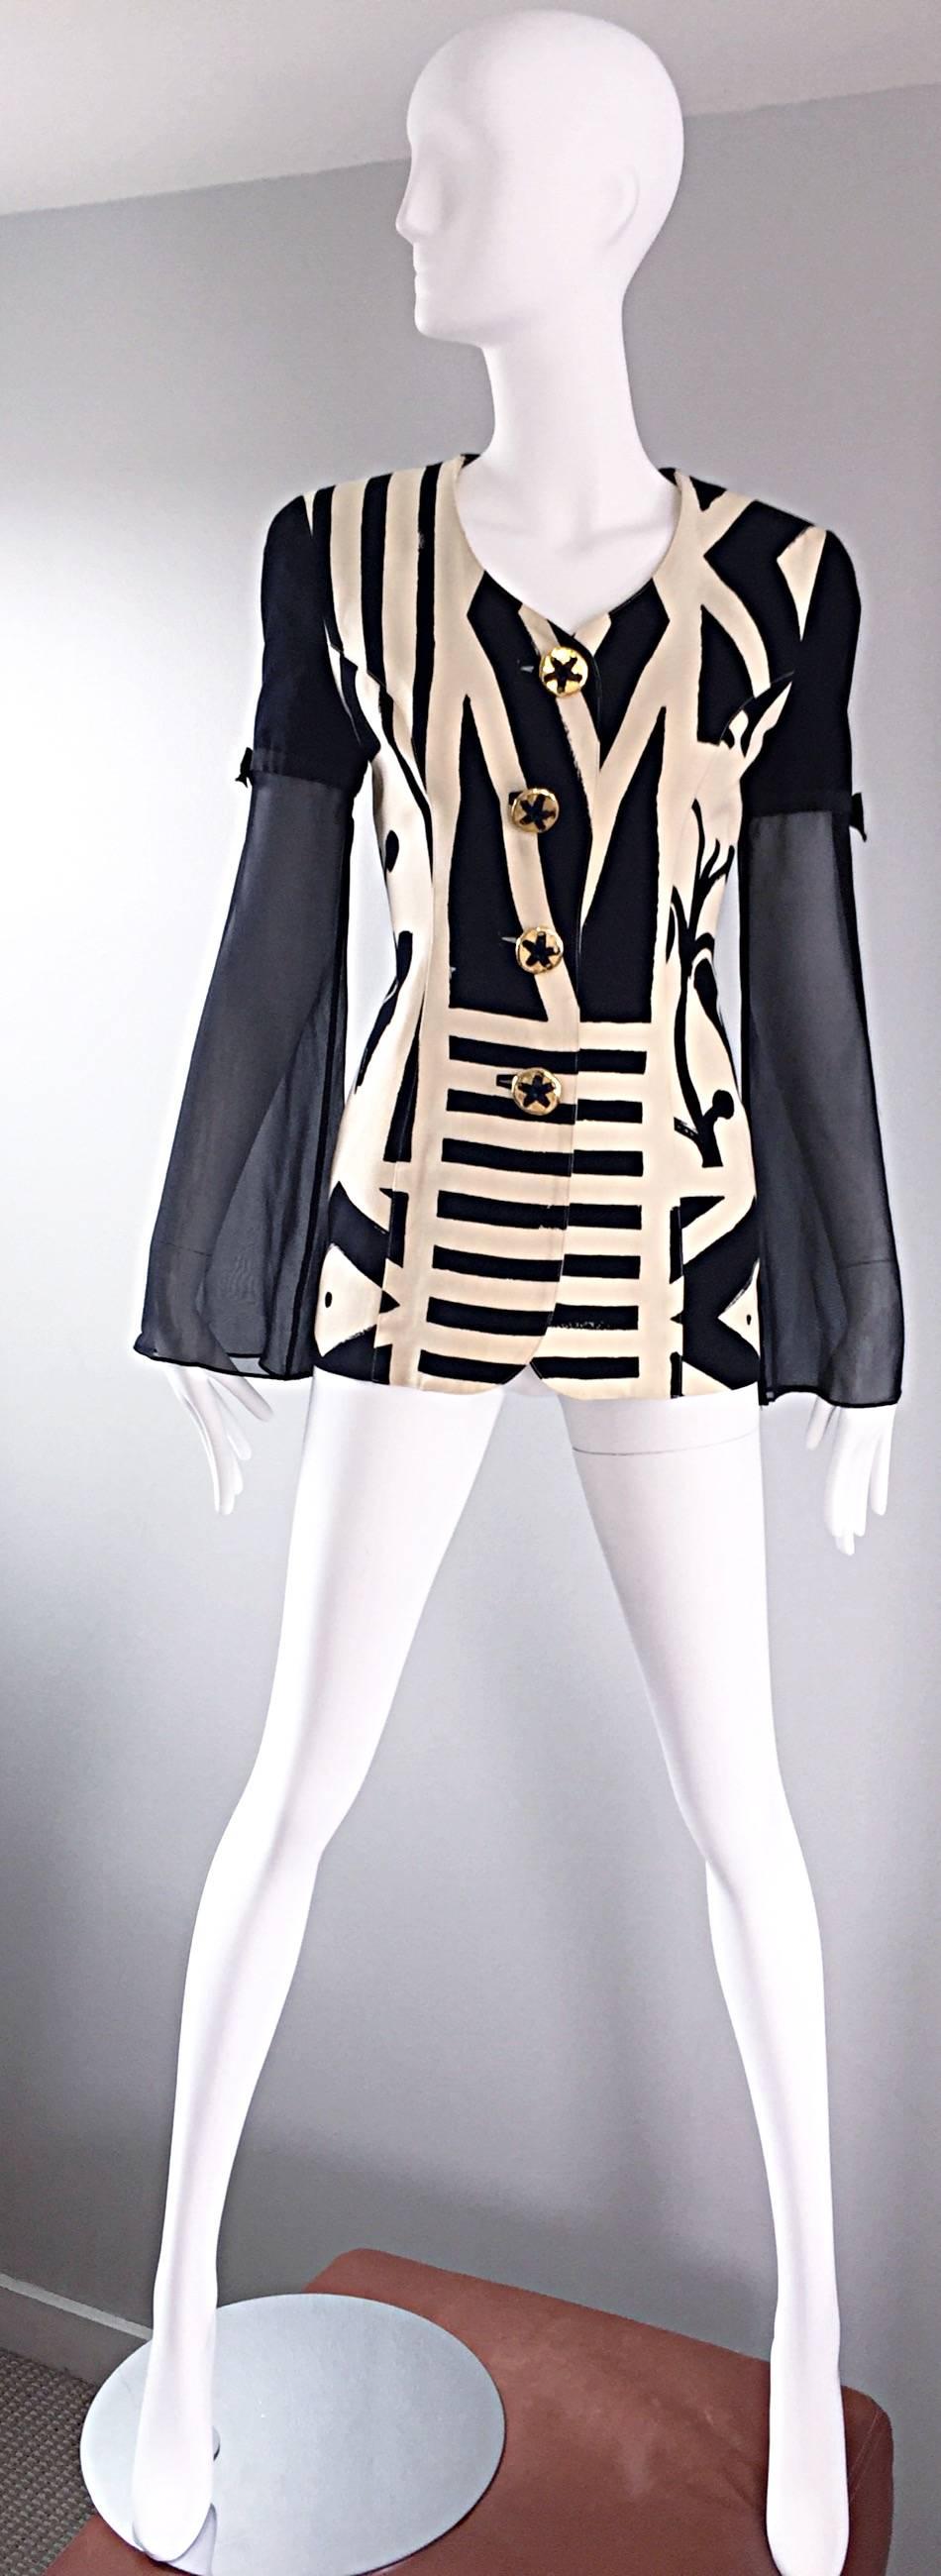 Amazing vintage 90s GEMMA KAHNG black and white Avant Garde blazer jacket! Wonderful tailored fit with impressive abstract prints. Oversized decorative gold buttons up the bodice. Semi sheer black silk chiffon angel sleeves, adorned with a chic